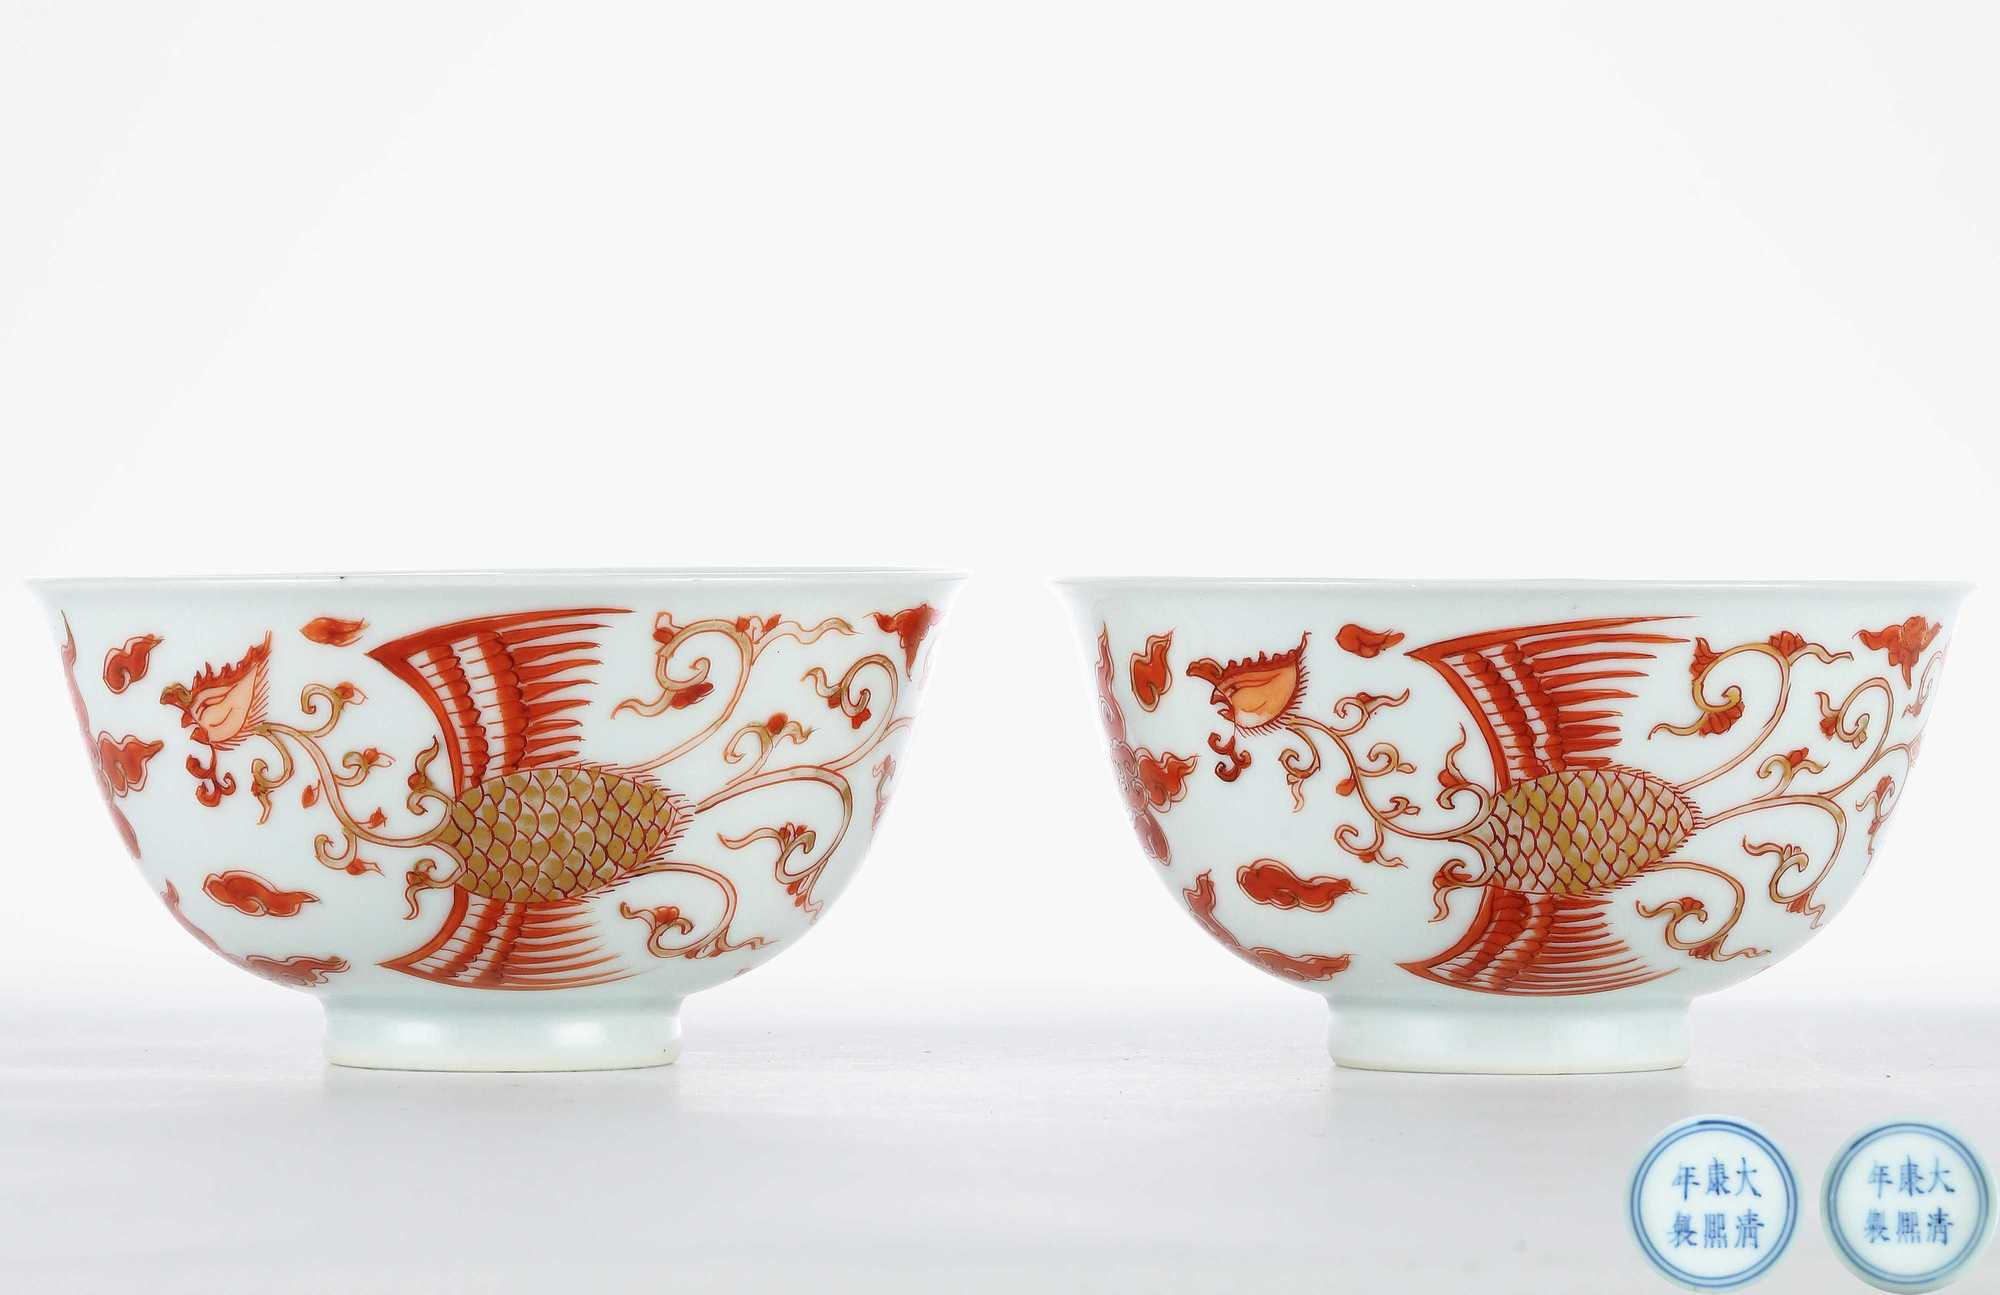 A RARE PAIR OF IRON-RED‘PHOENIX’ BOWLS